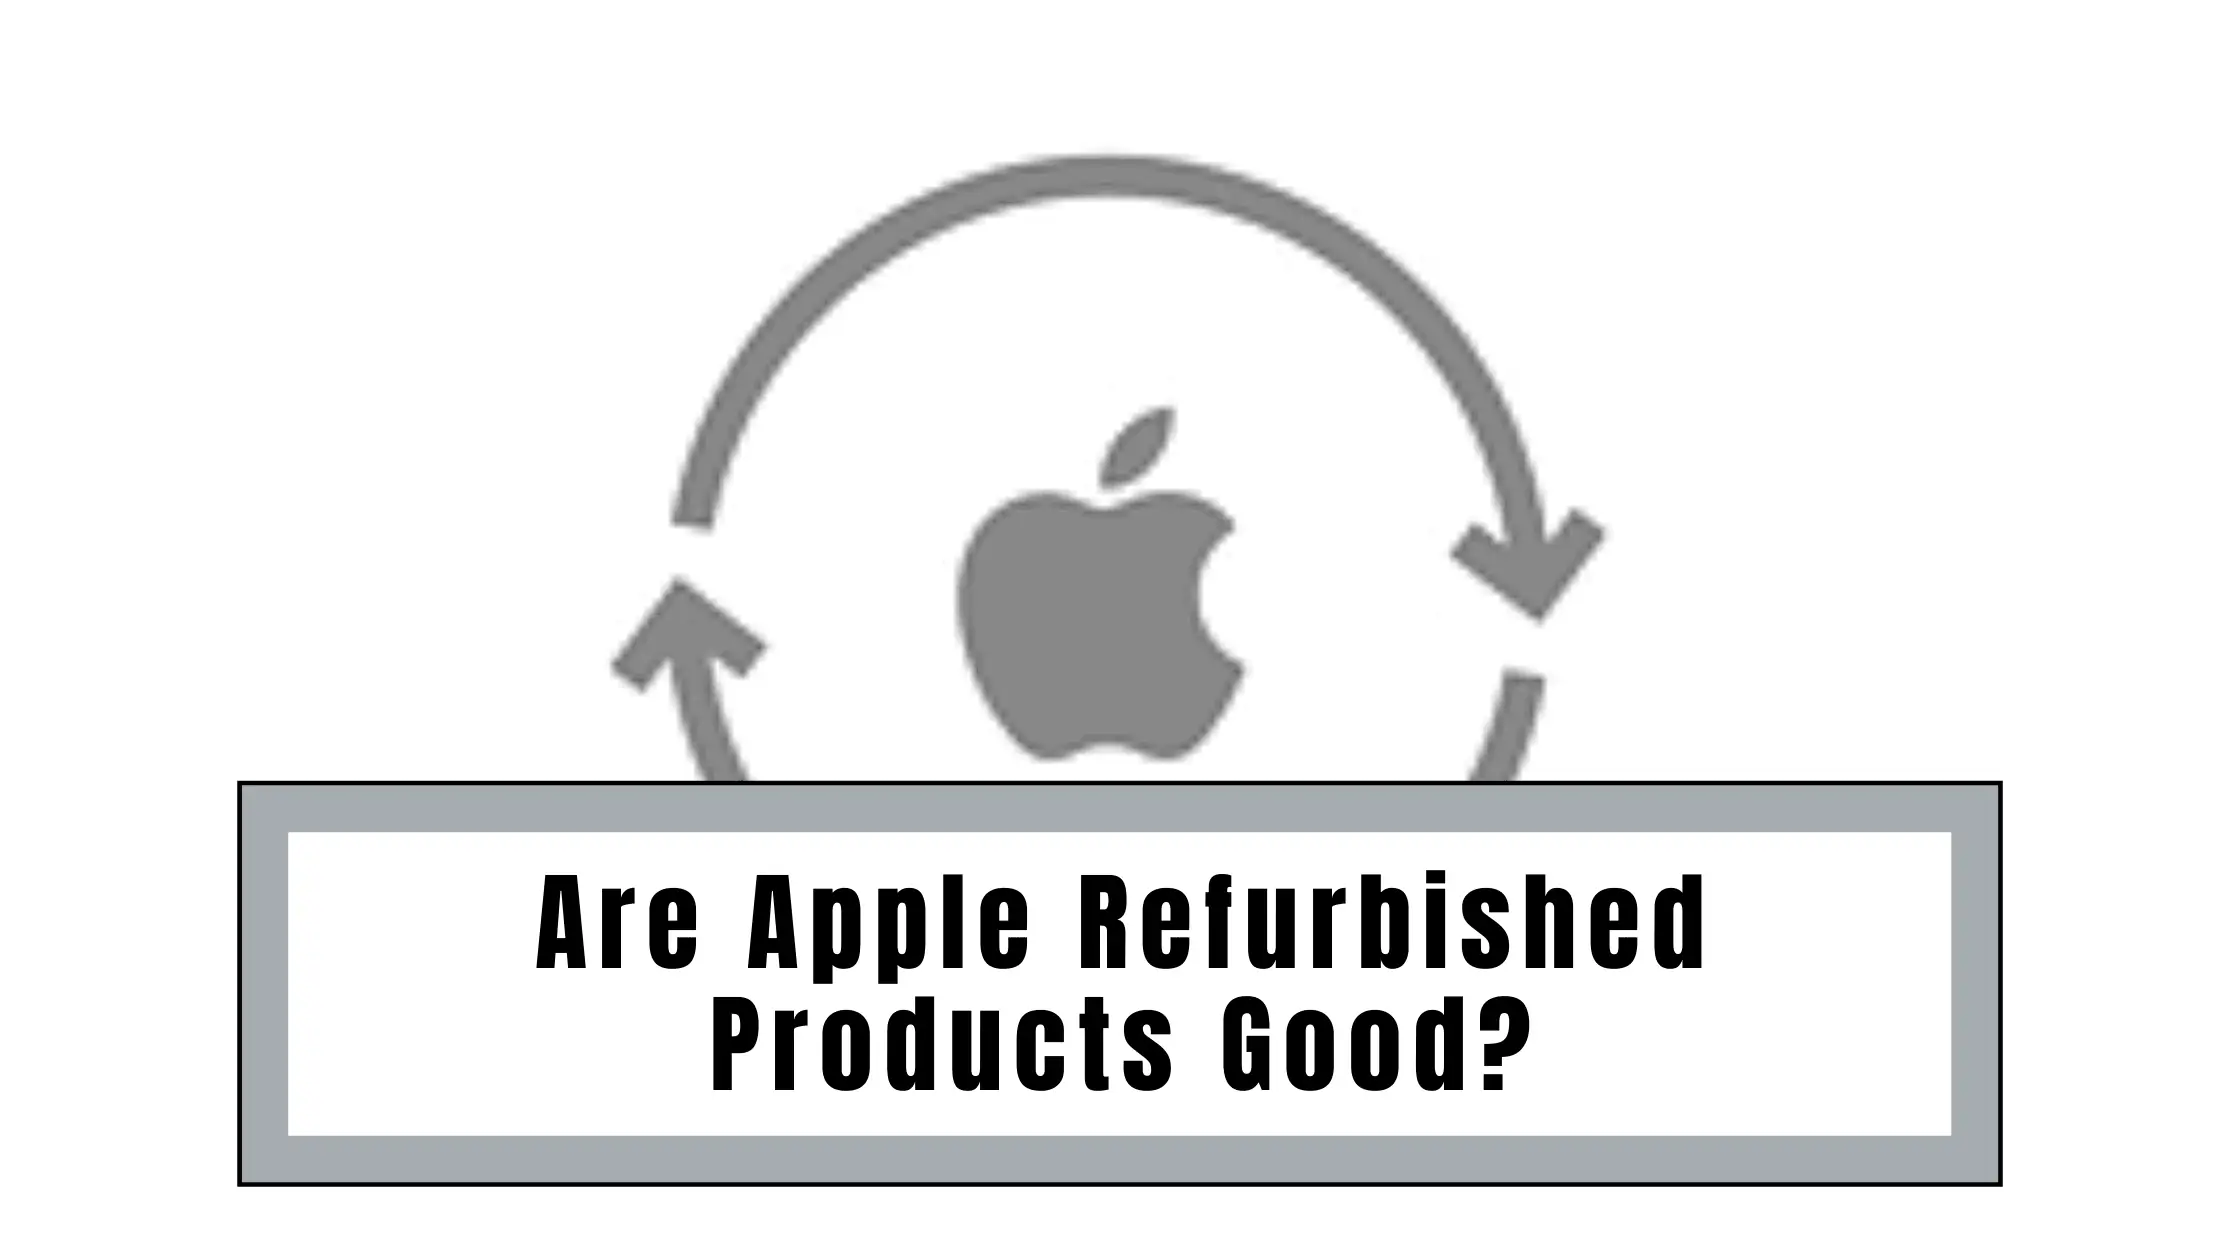 Are Apple Refurbished Products Good